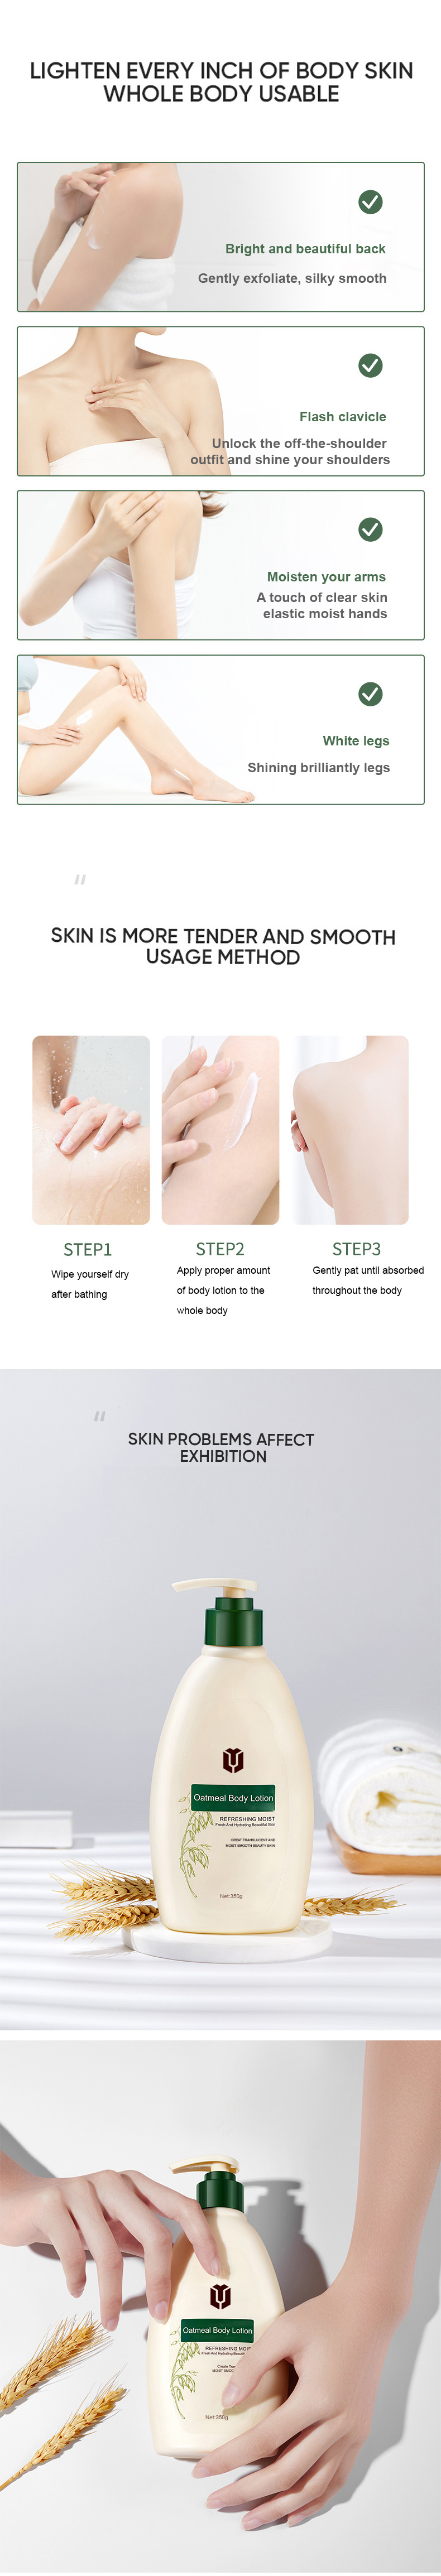 Mars Cosmetics Manufacturer Best Cream for Fairness and Glowing Skin Hand Cream for Dry Skin